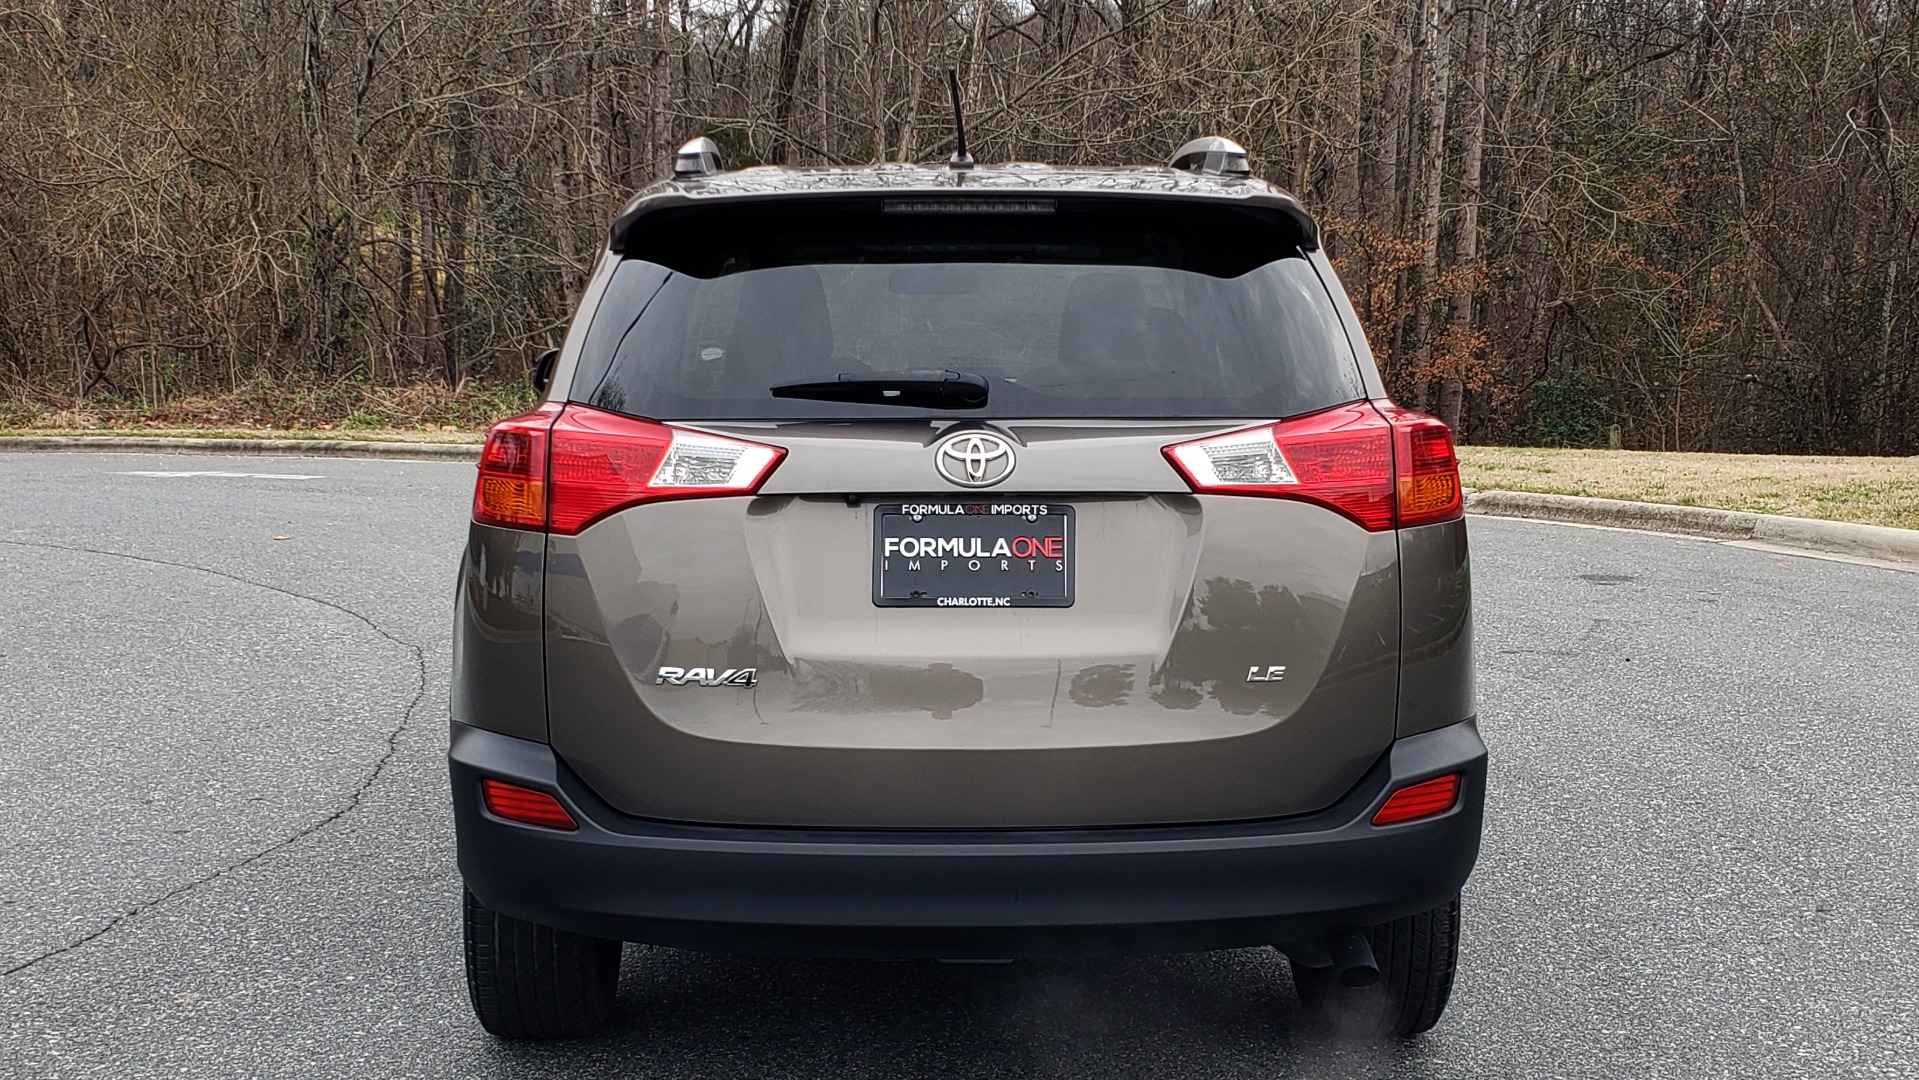 Used 2013 Toyota RAV4 LE / AUTO / FWD / 29 MPG HWY / CLEAN CARFAX for sale Sold at Formula Imports in Charlotte NC 28227 26